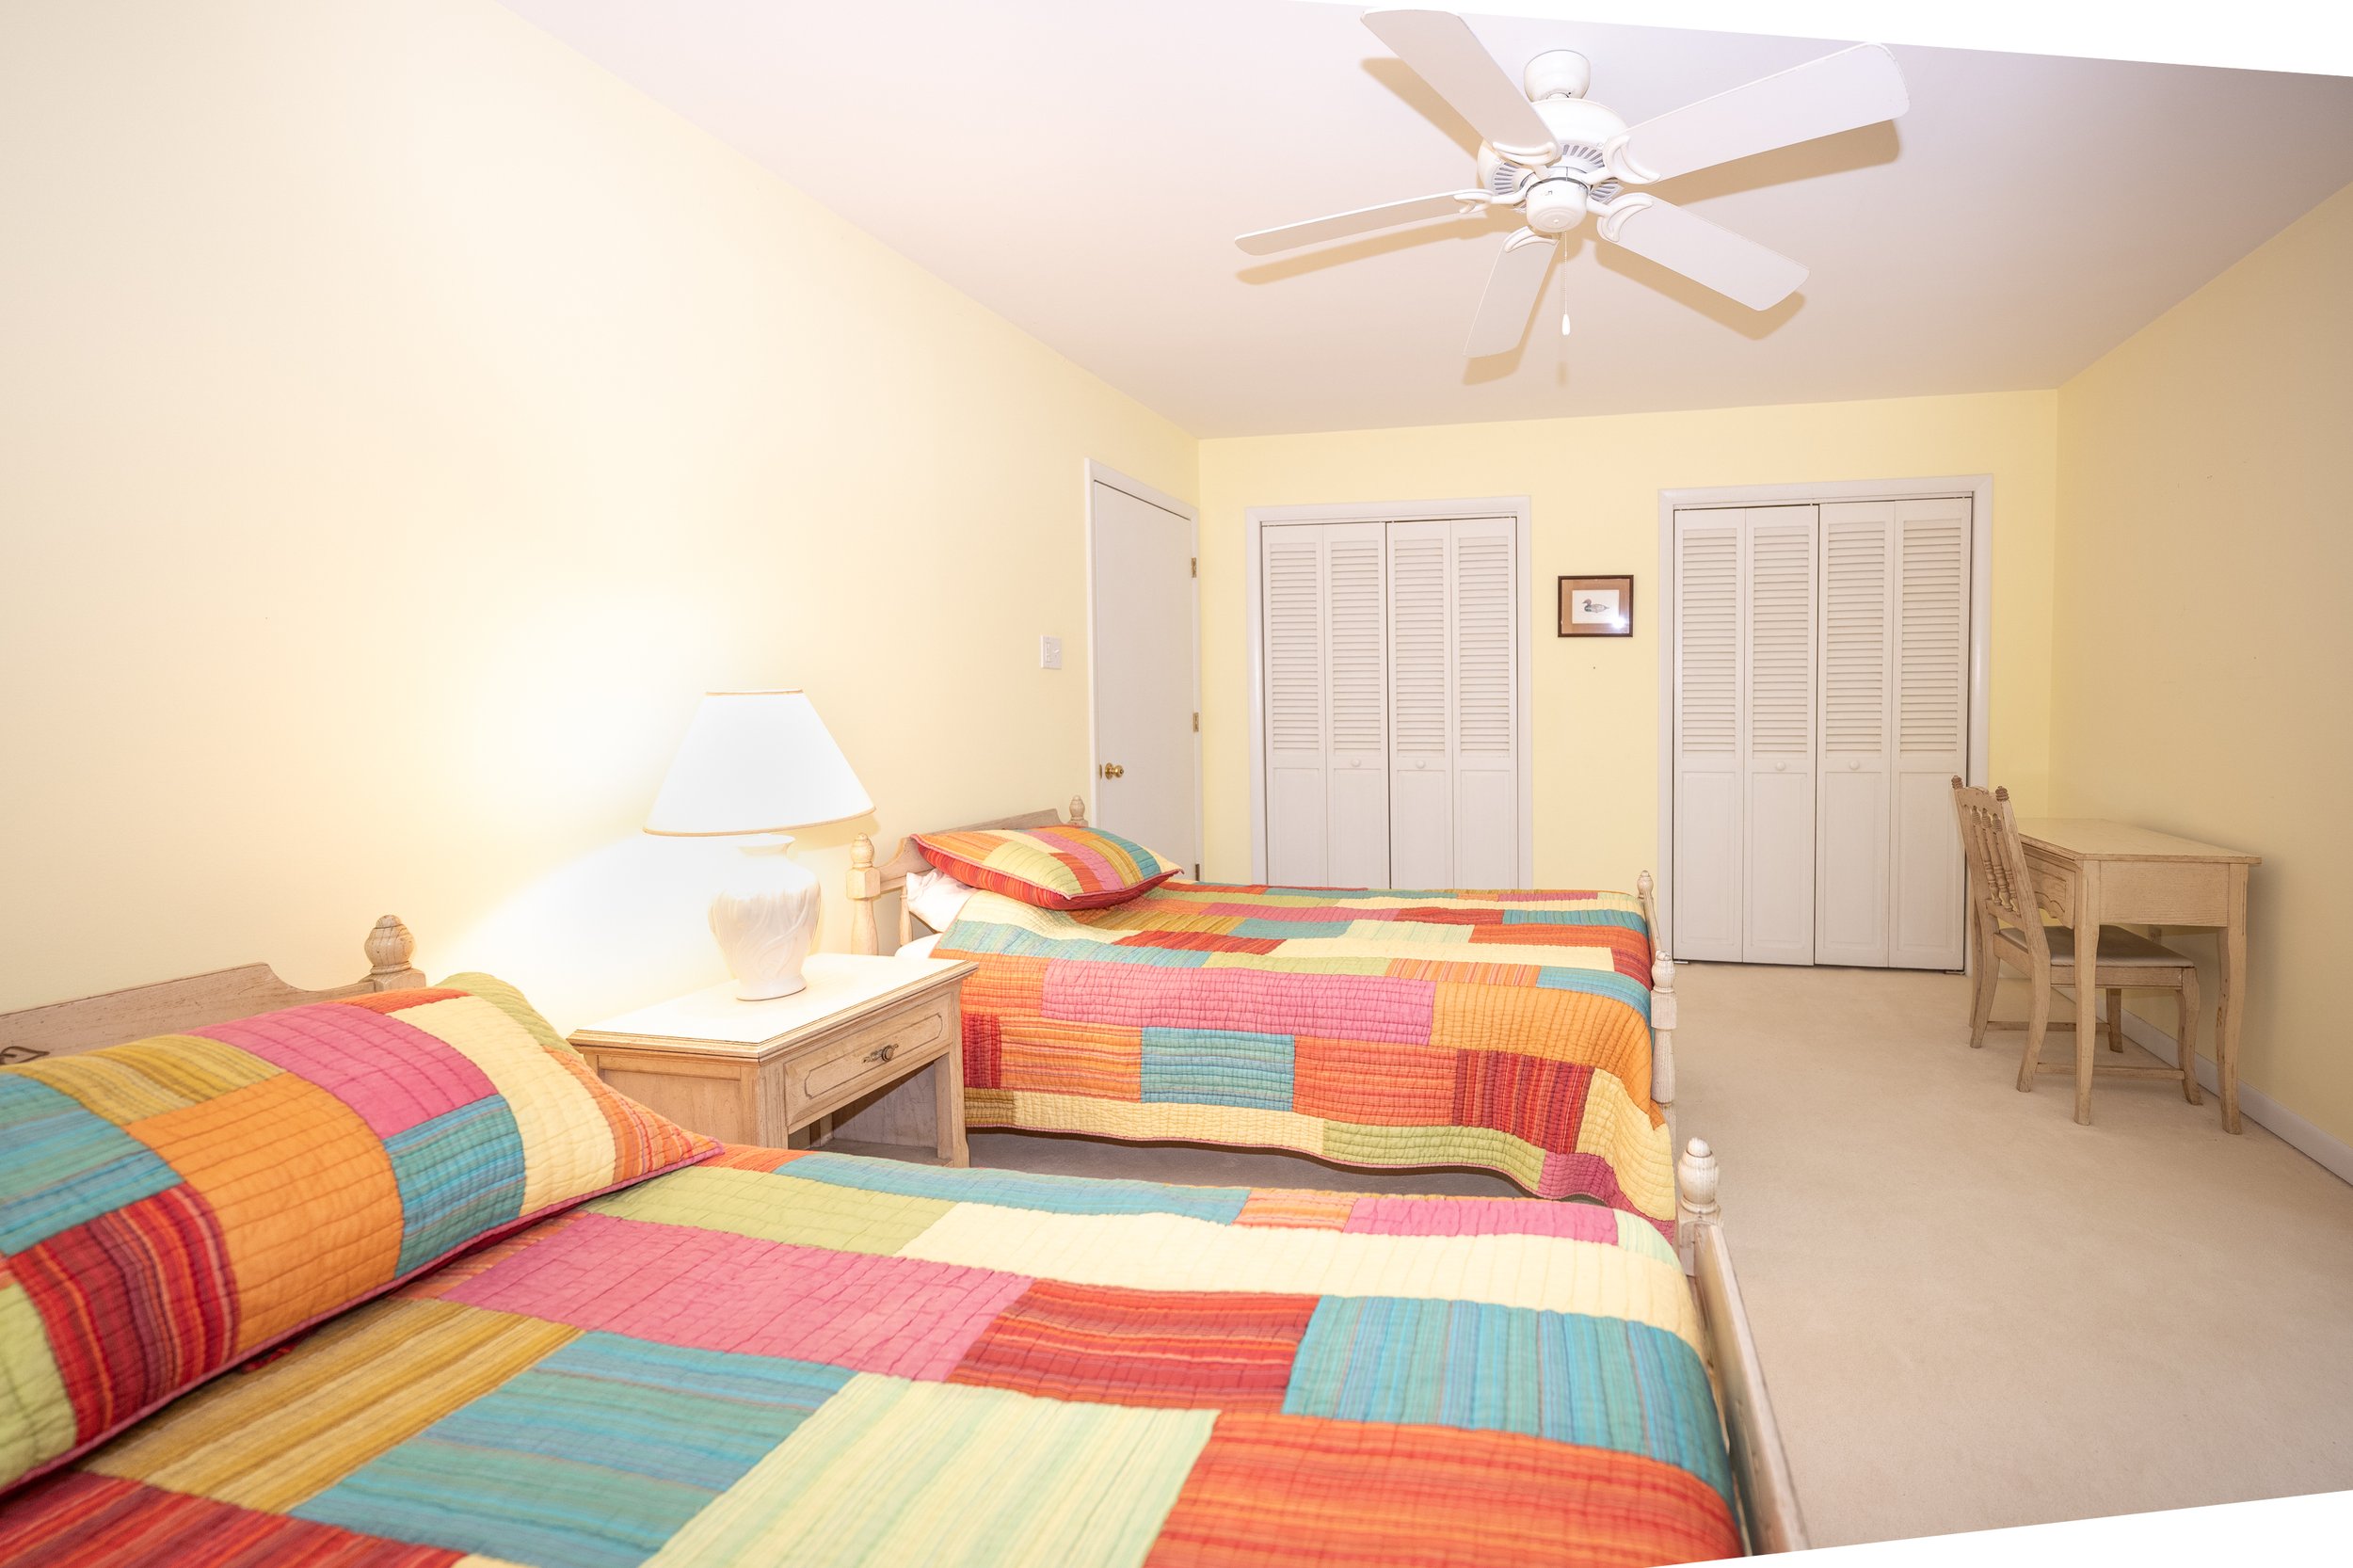 229 Oyster House - Guest Bedroom 2.jpg